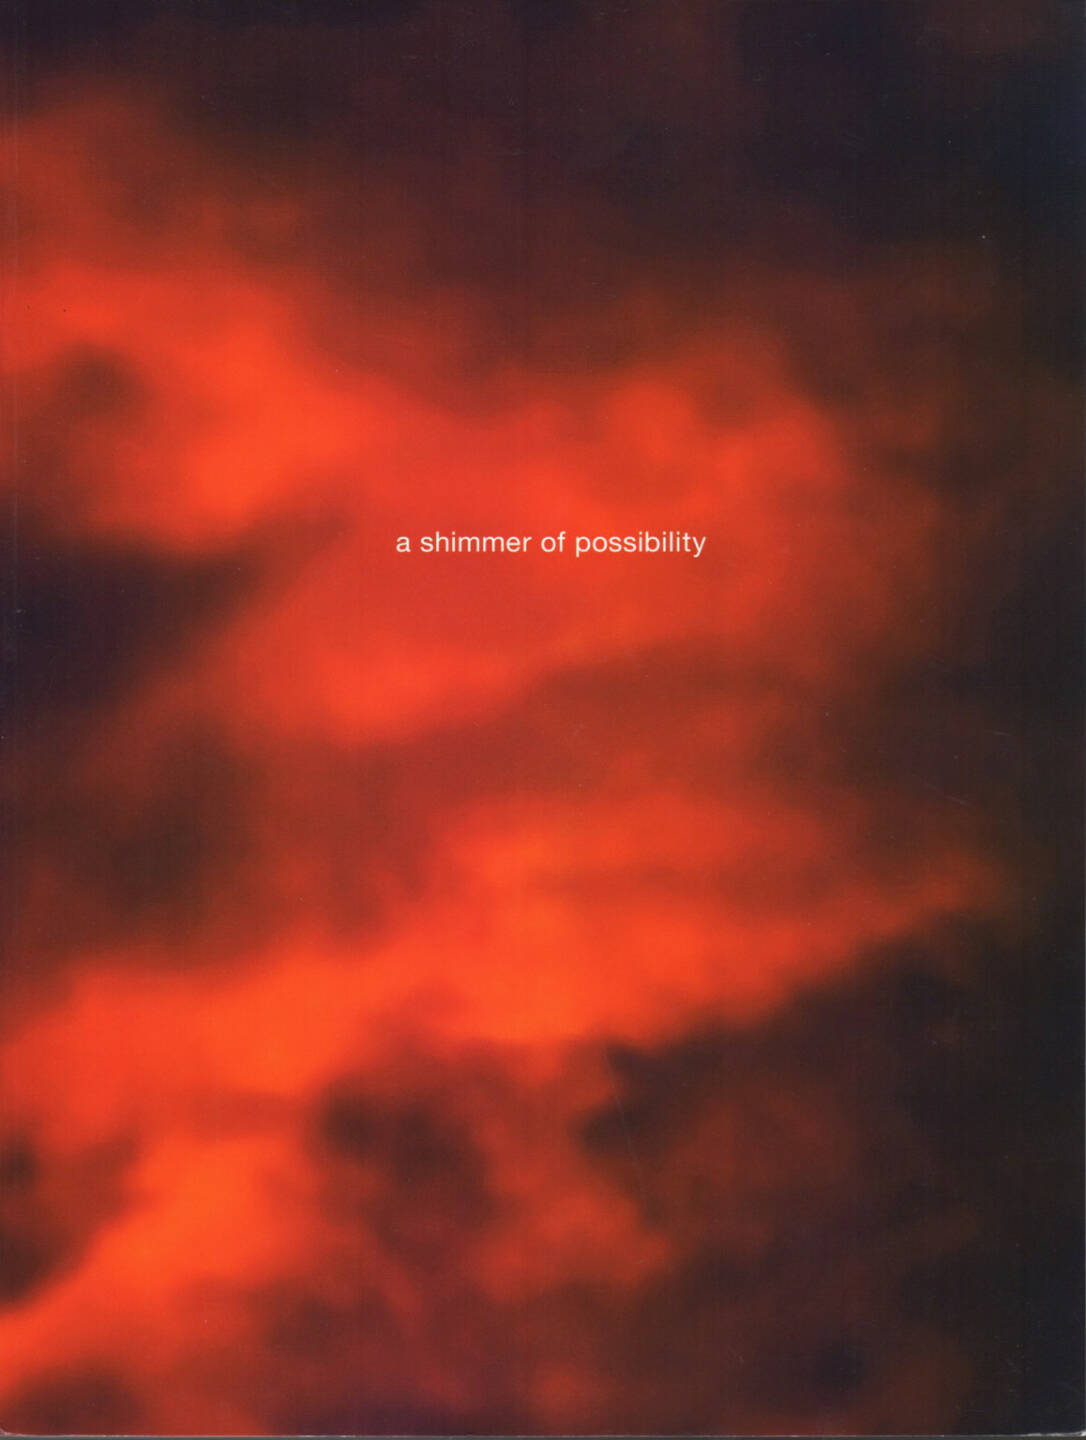 Paul Graham - A shimmer of possibility (softcover edition), 120-150 Euro,  http://josefchladek.com/book/paul_graham_-_a_shimmer_of_possibility_1